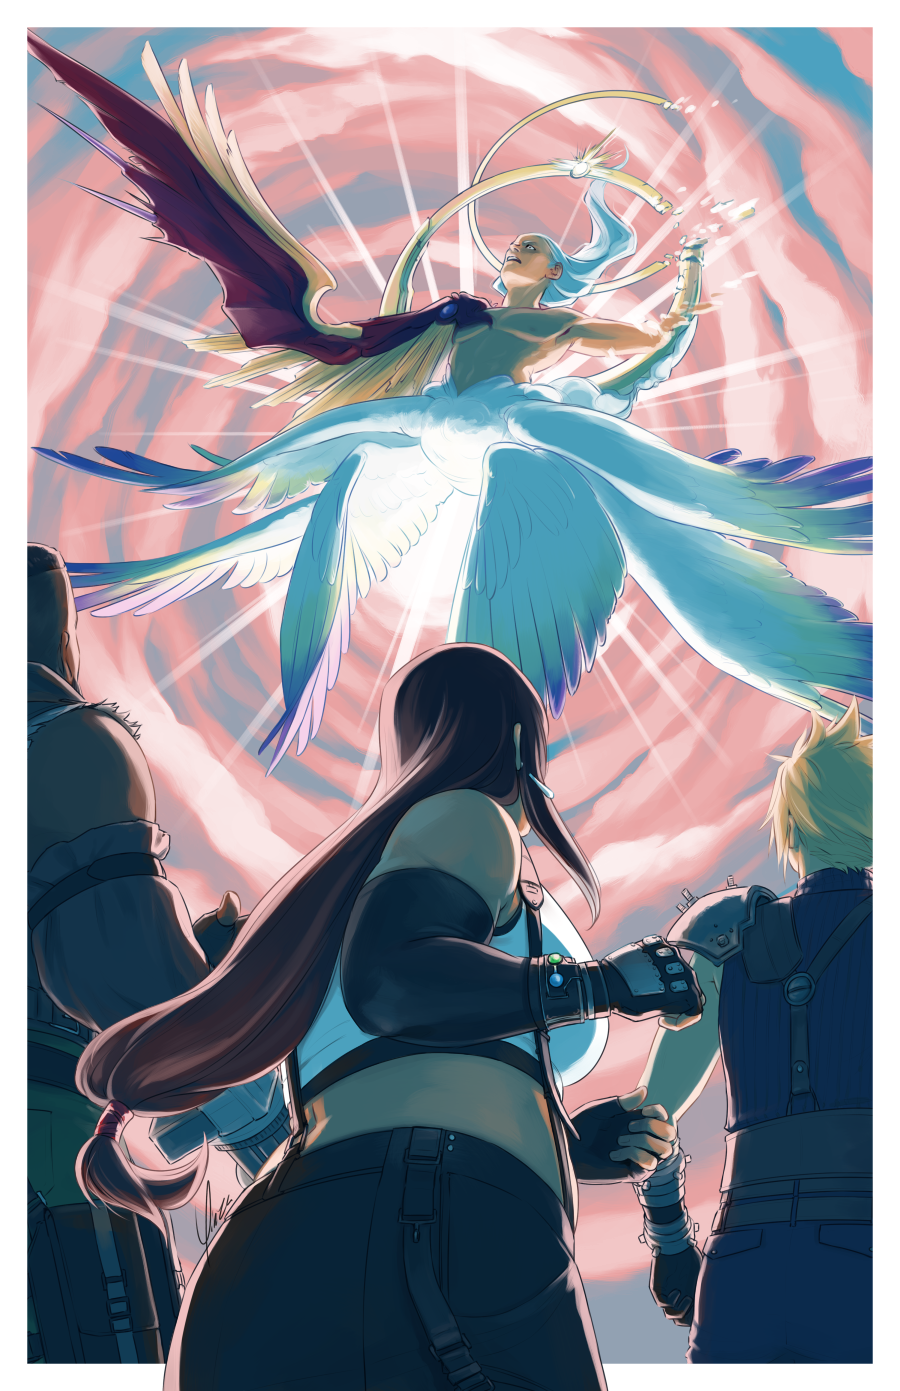 An illustration depicting 20-year-old Tifa with Barret and Cloud standing on either side of her, weapons lowered. Tifa is just starting to lower her fists. Above them, against a swirling vortex of pink and blue clouds, is Safer Sephiroth, who is beginning to disintegrate.